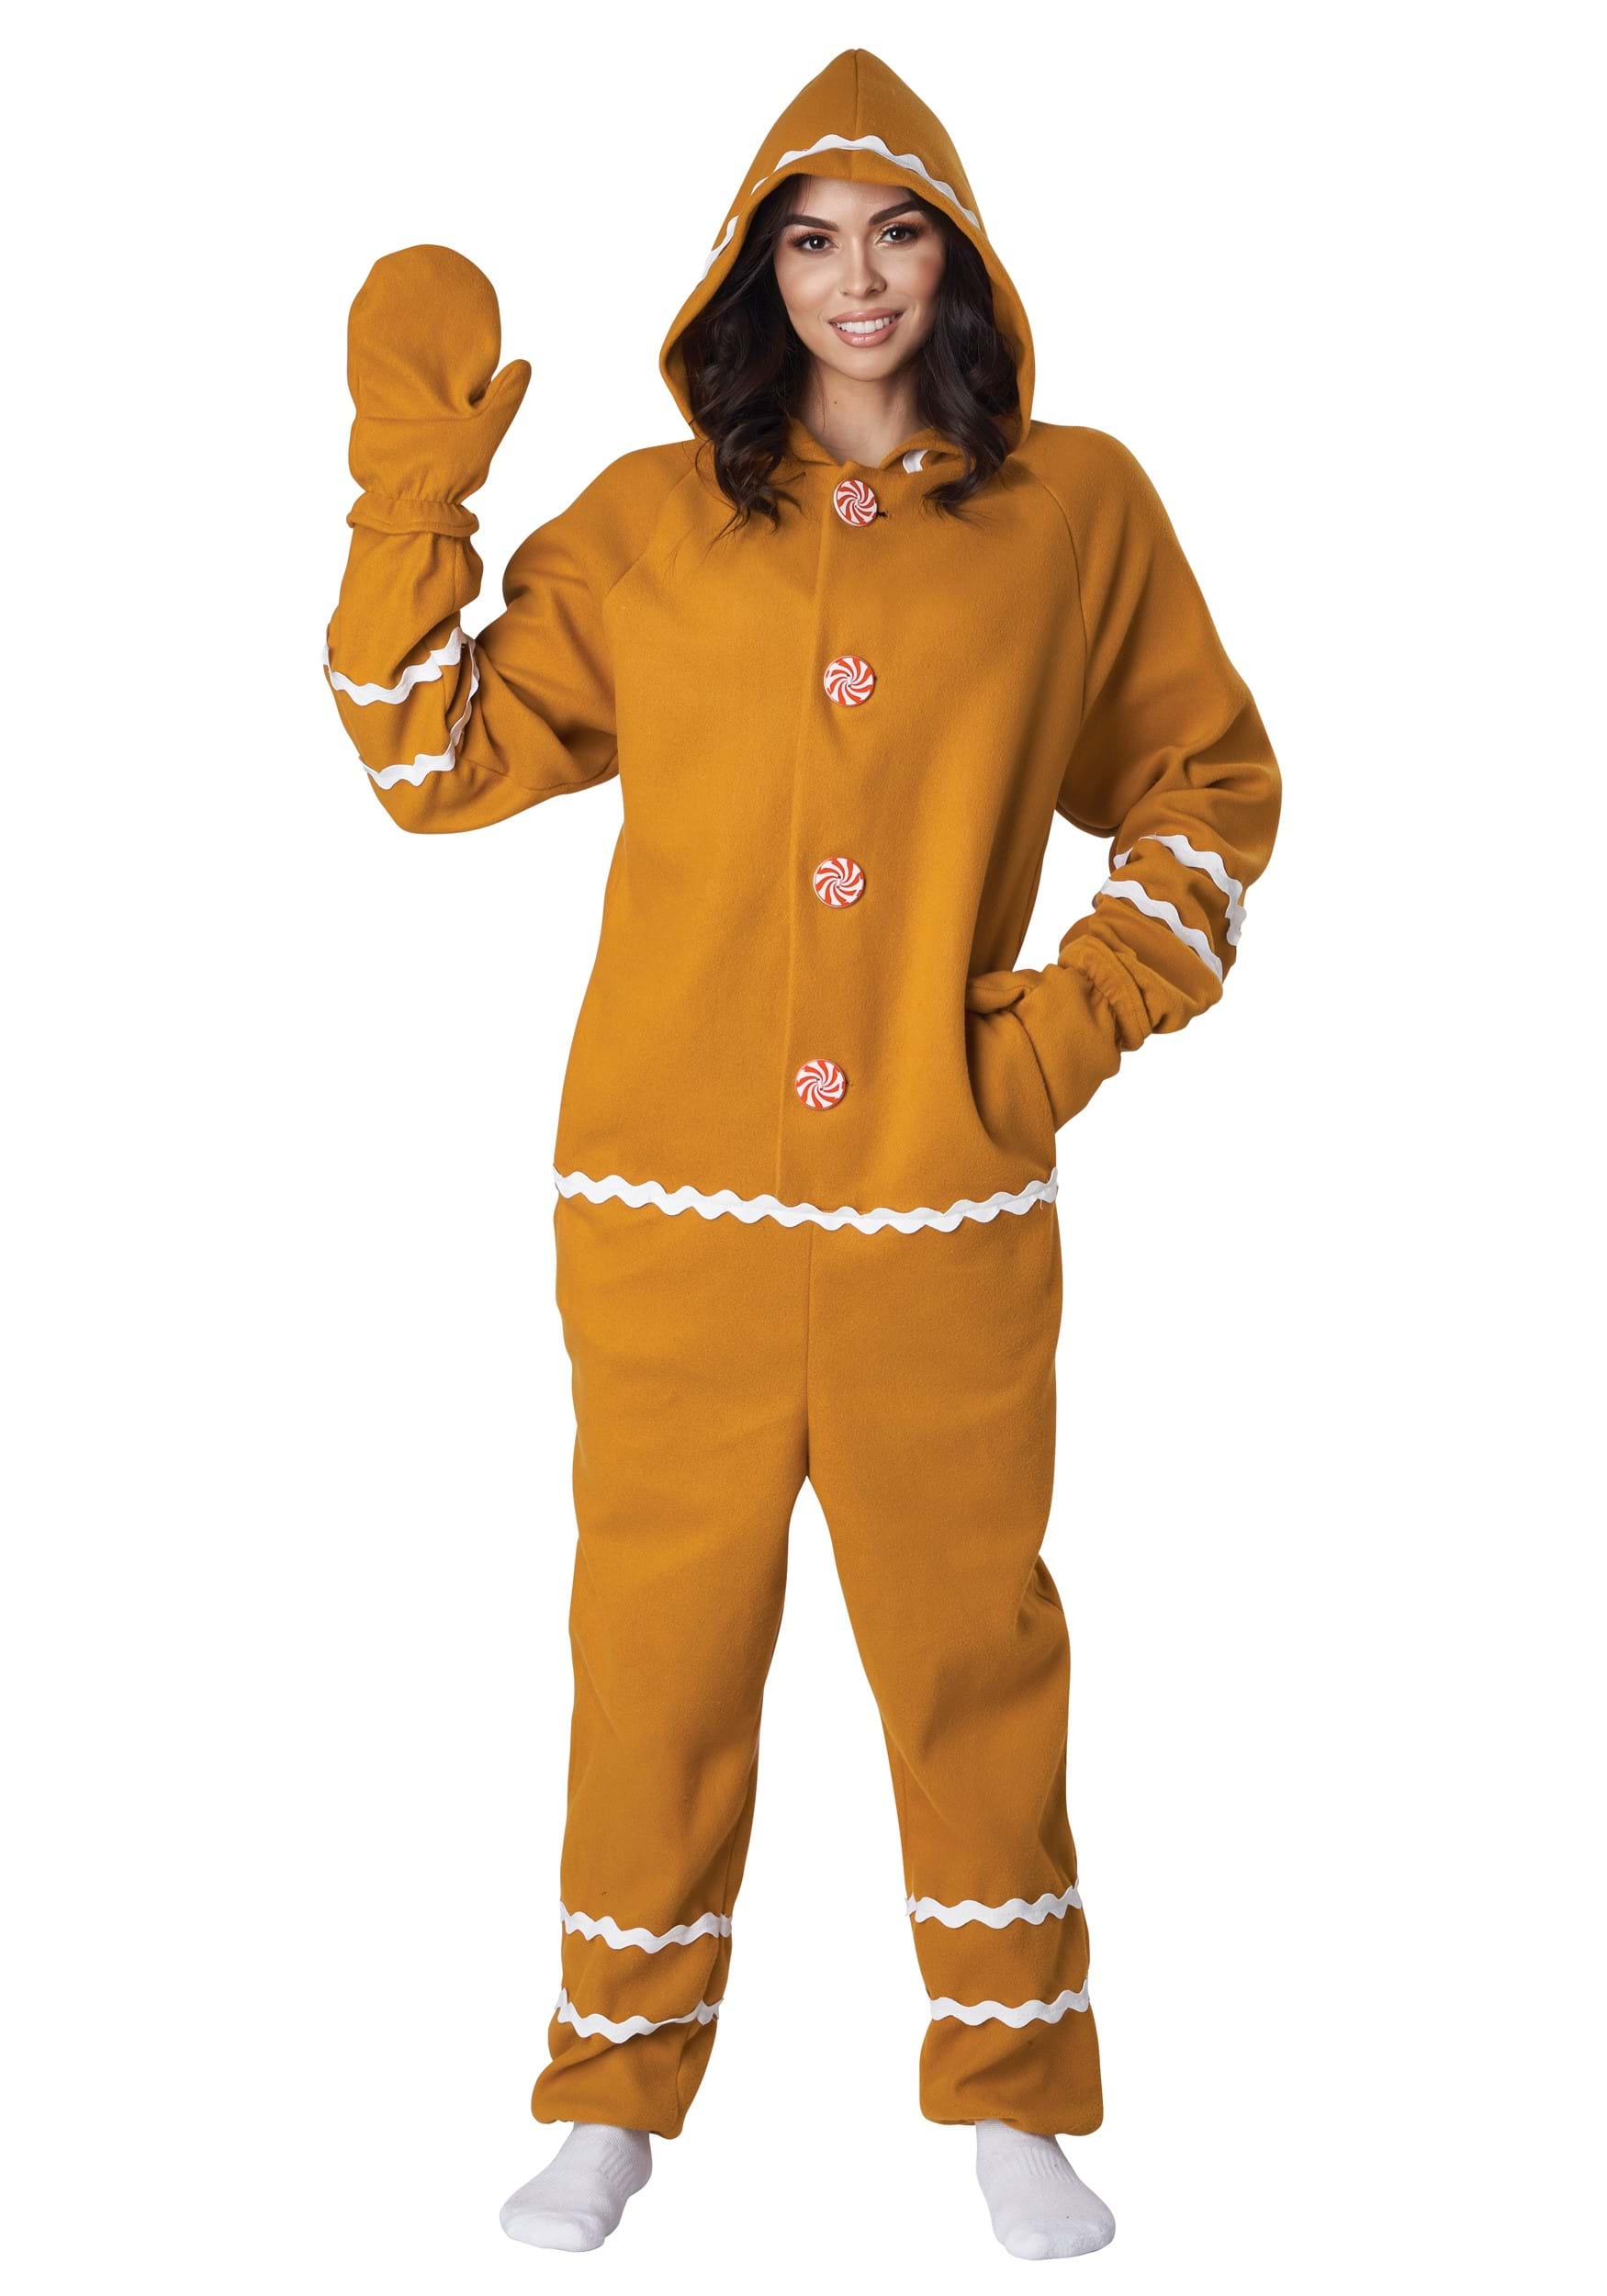 Gingerbread Jumpsuit Costume for Adults